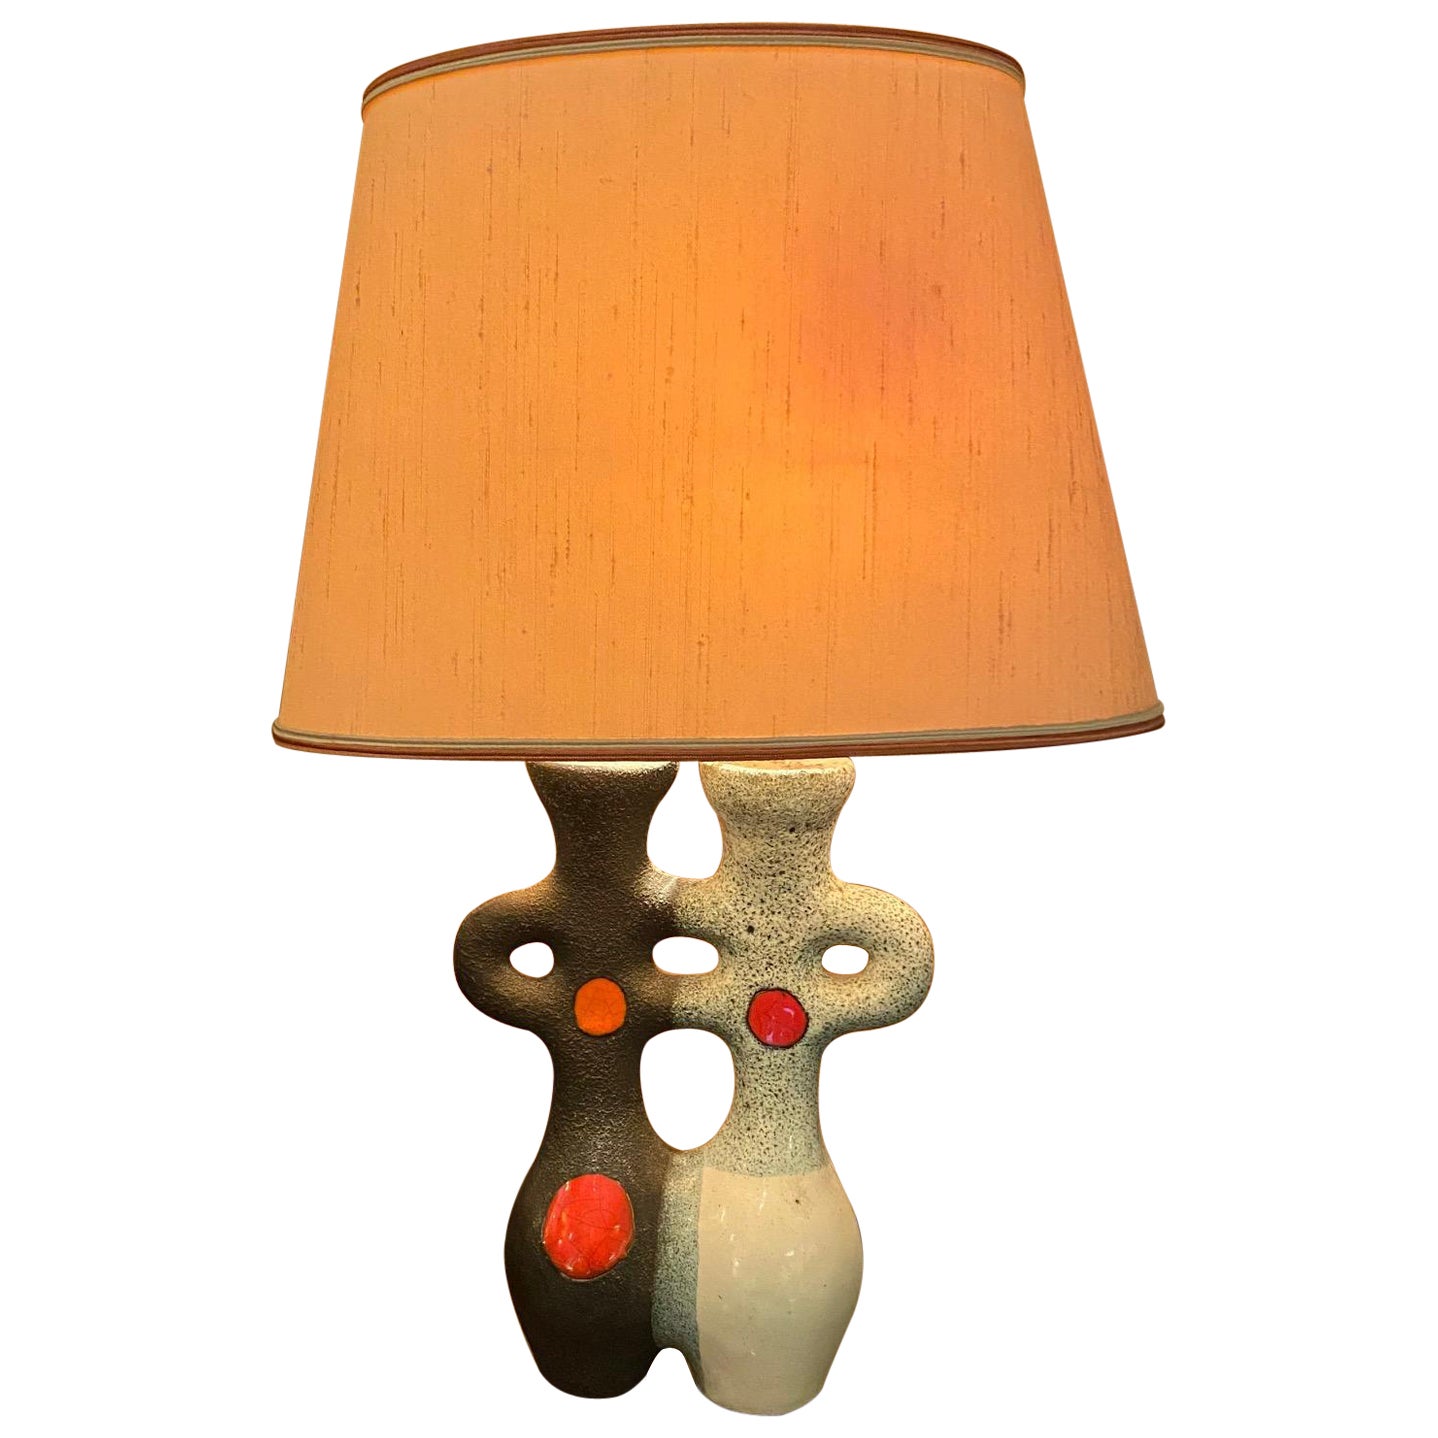 Ceramic Table Lamp by Les Archanges/Gilbert Valentin, Vallauris, France, 1950s For Sale